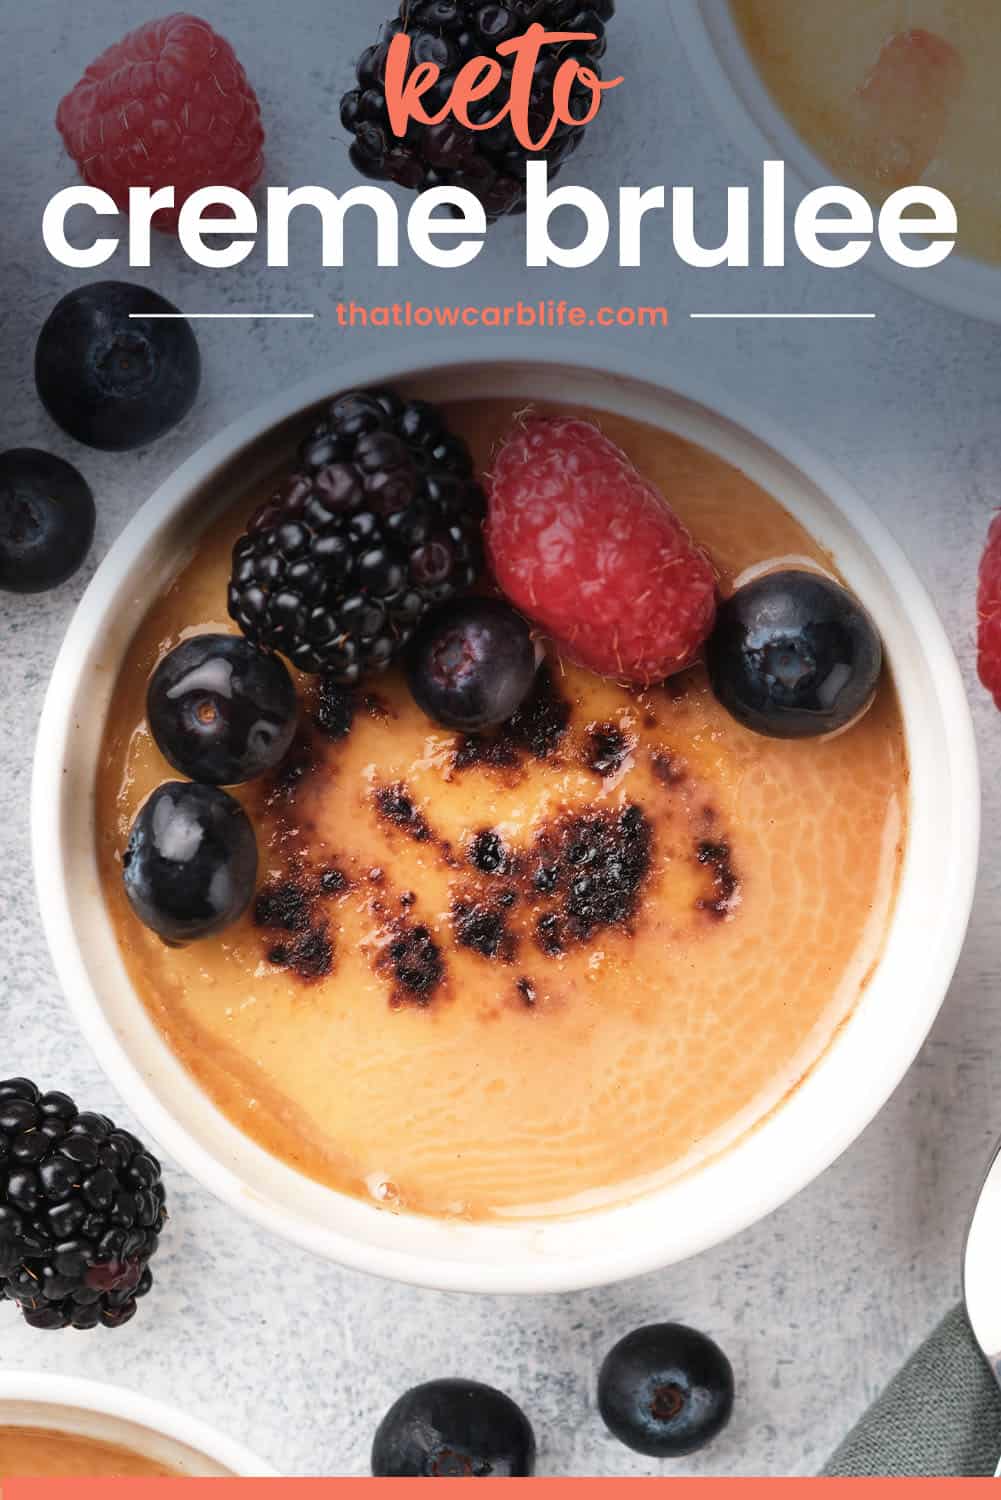 keto creme brulee in small ramekin with text for PInterest.